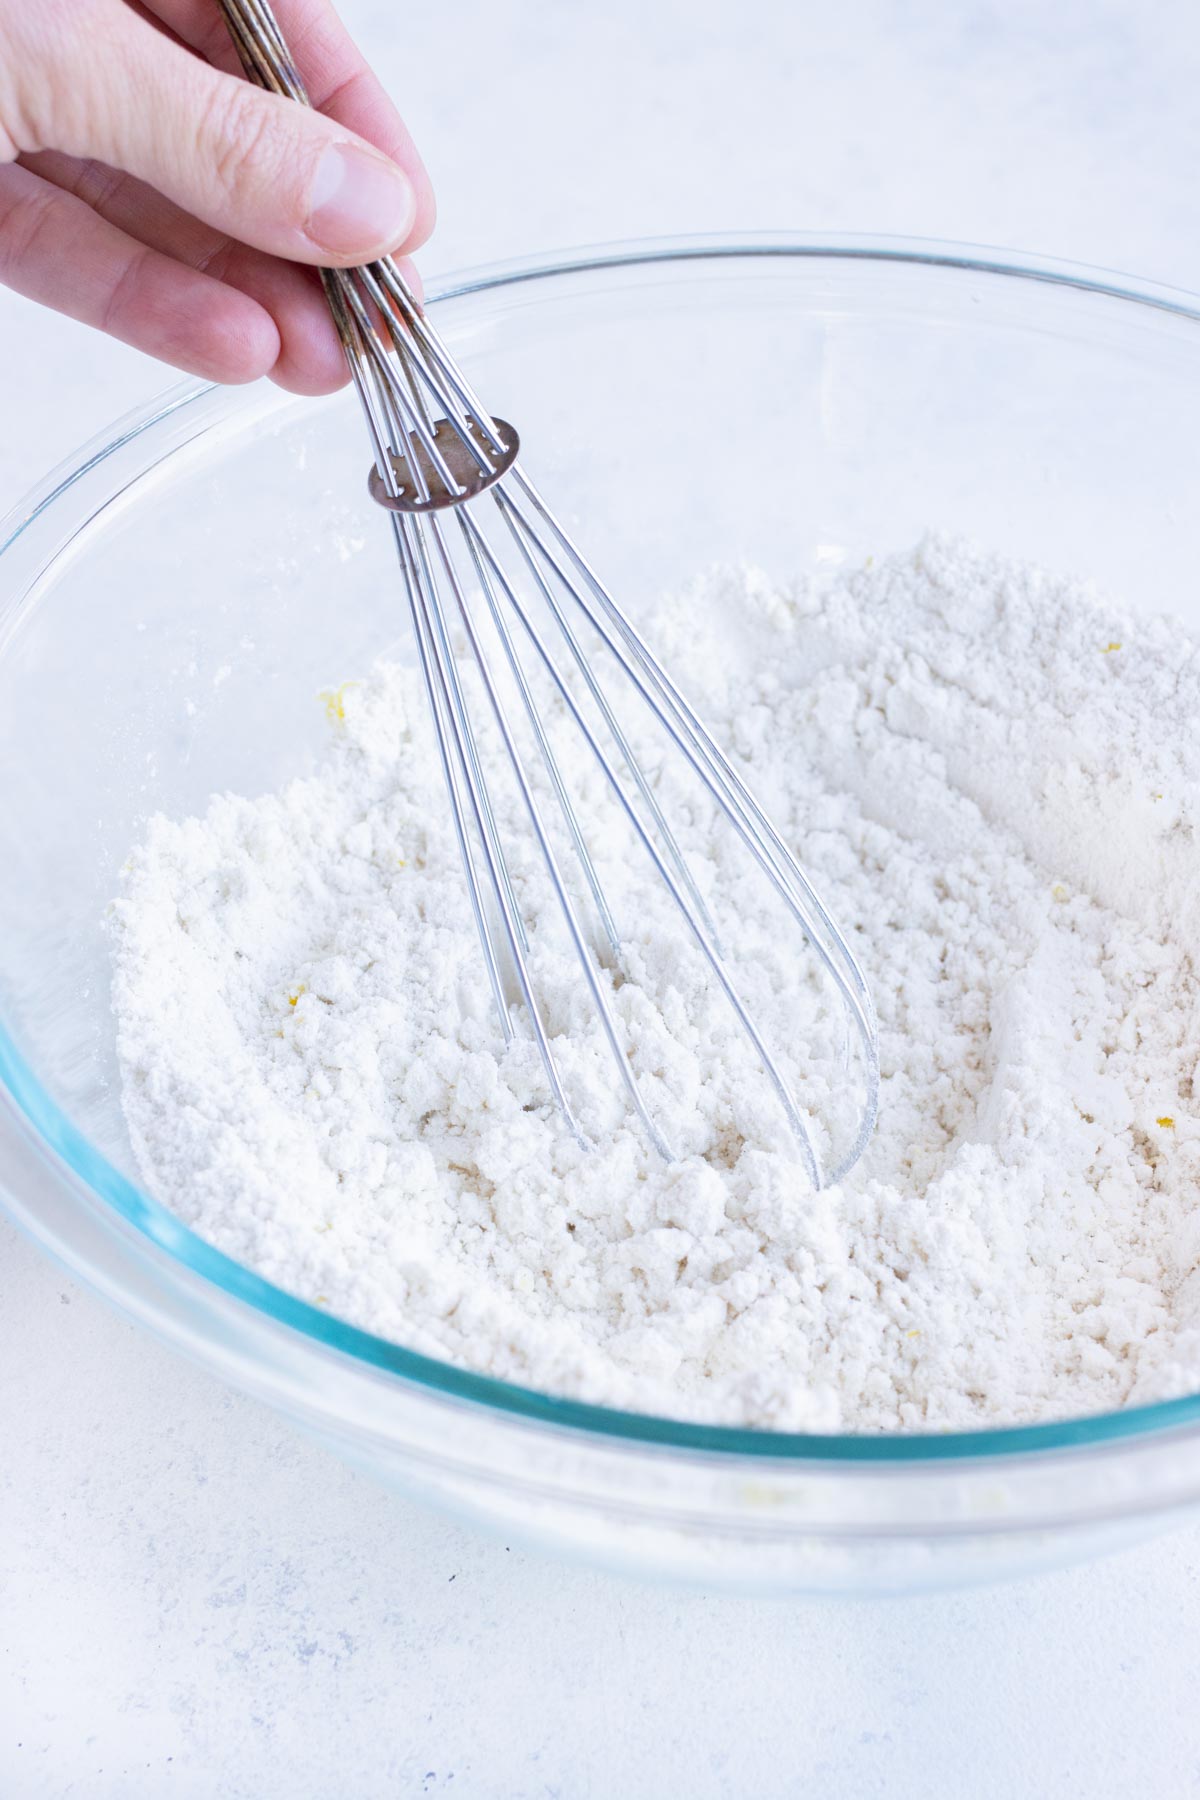 Dry ingredients are mixed together in a bowl.